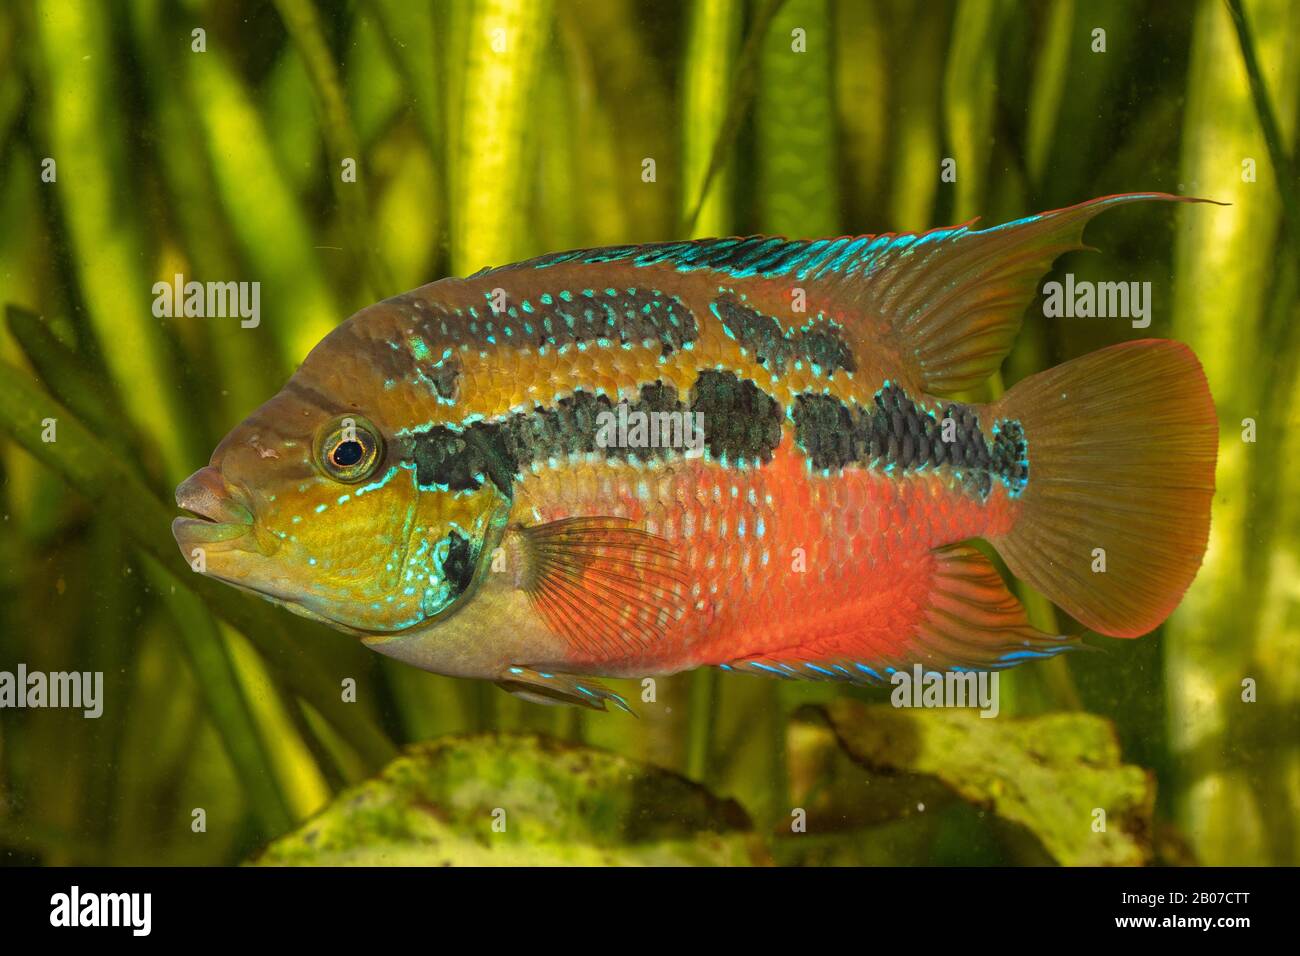 Salvin's Cichlid, Yellow Belly (Cichlasoma salvini, Nandopsis salvini), male in spawning coloration Stock Photo